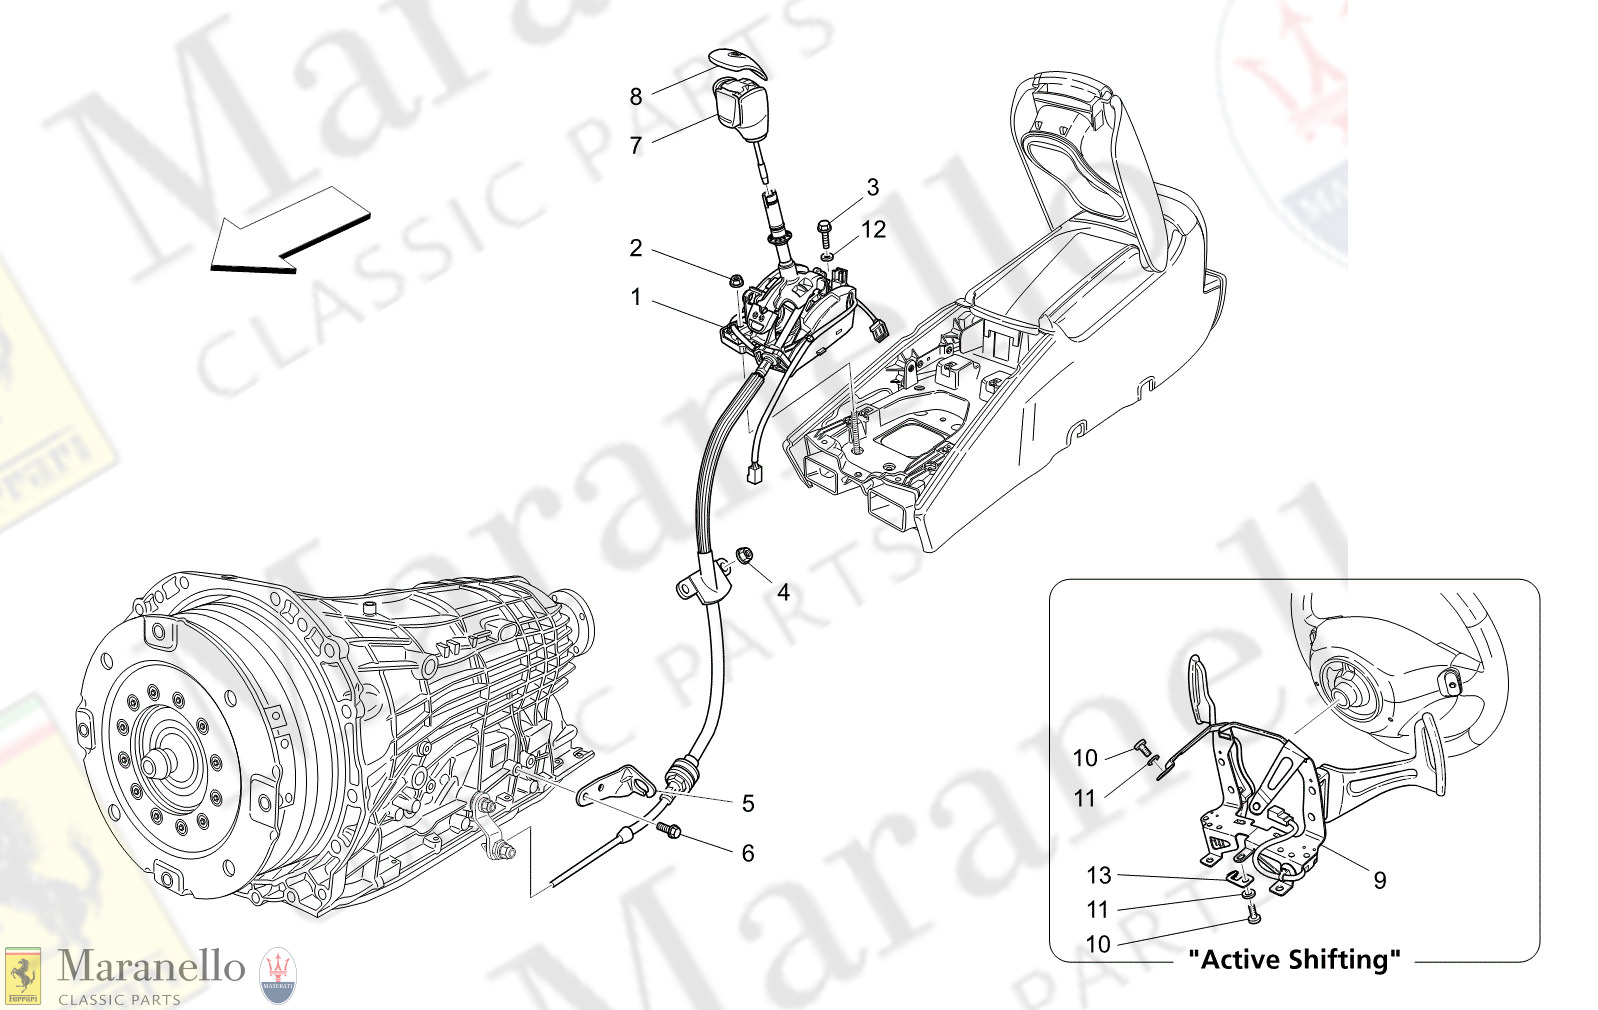 03.02 - 11 - 0302 - 11 Driver Controls For Automatic Gearbox